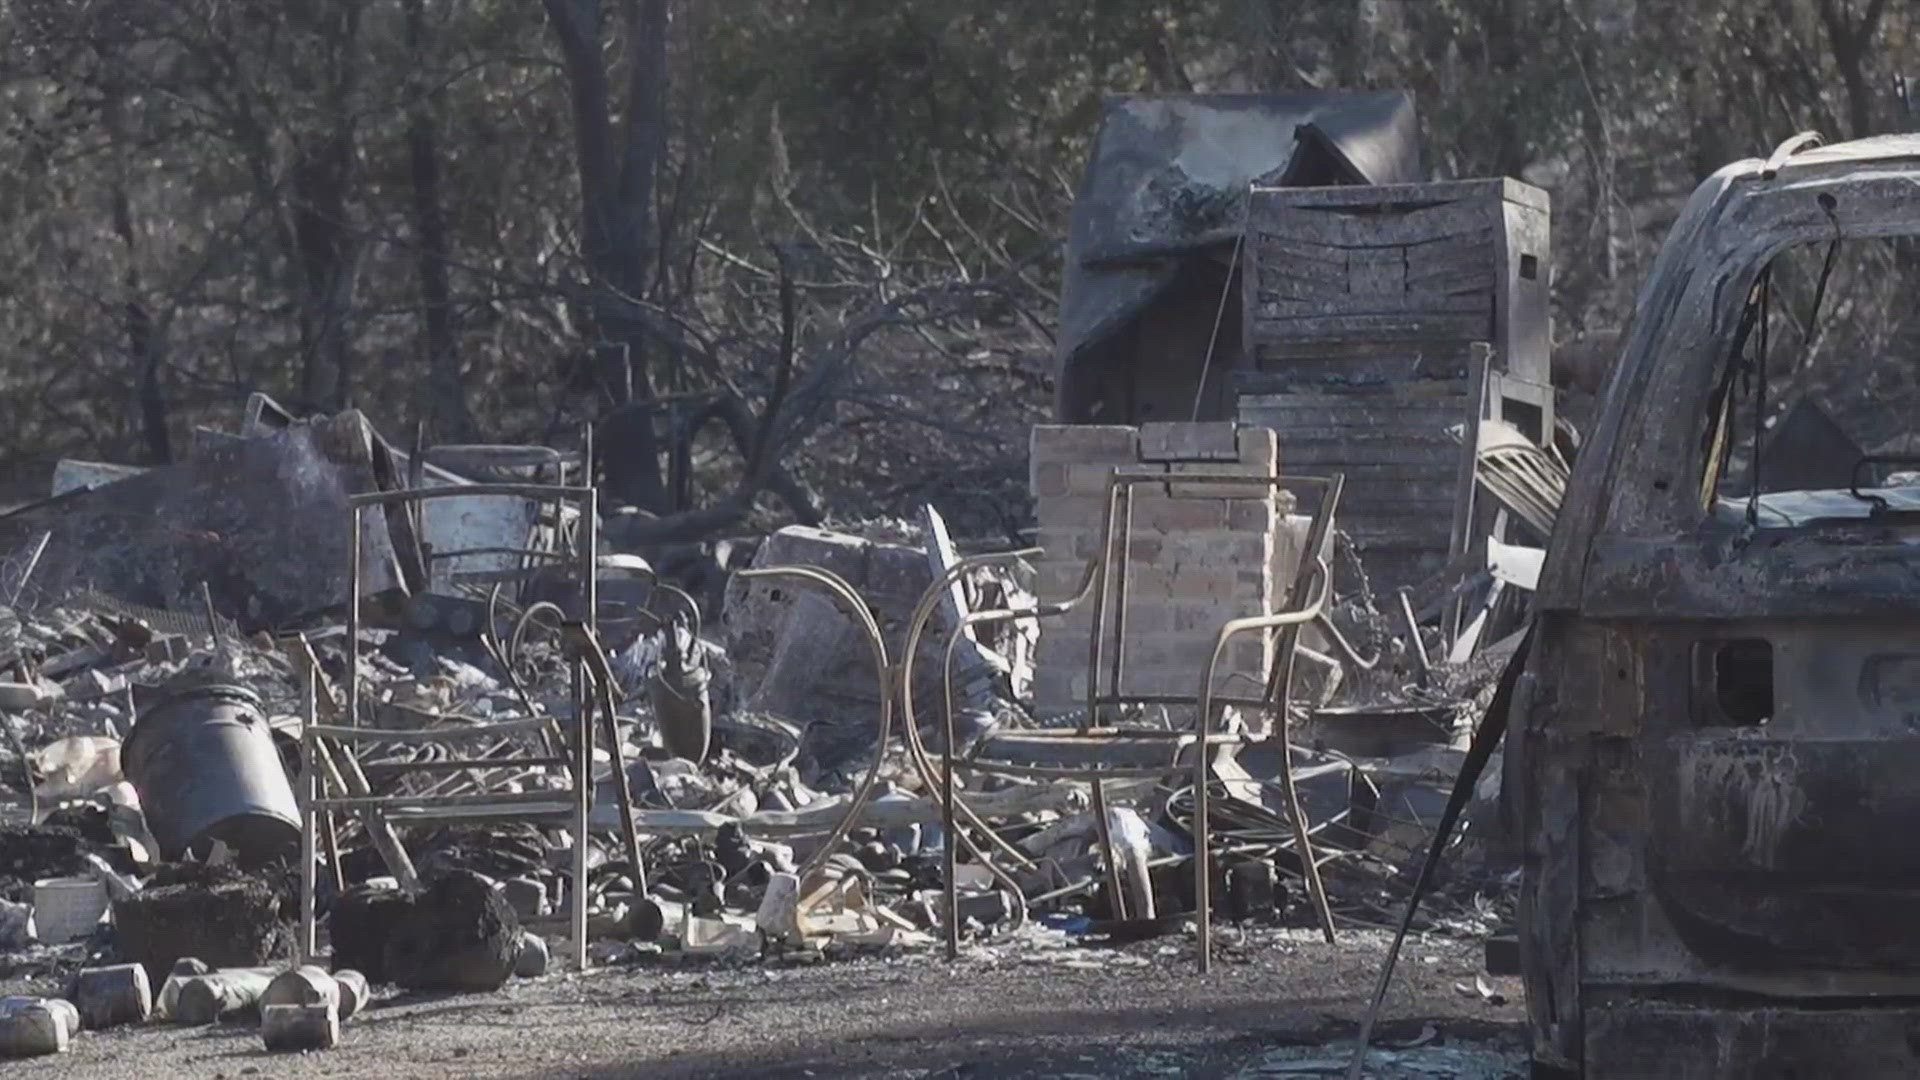 Thousands of people are still away from their homes due to evacuations from the Thompson Fire in Butte County.